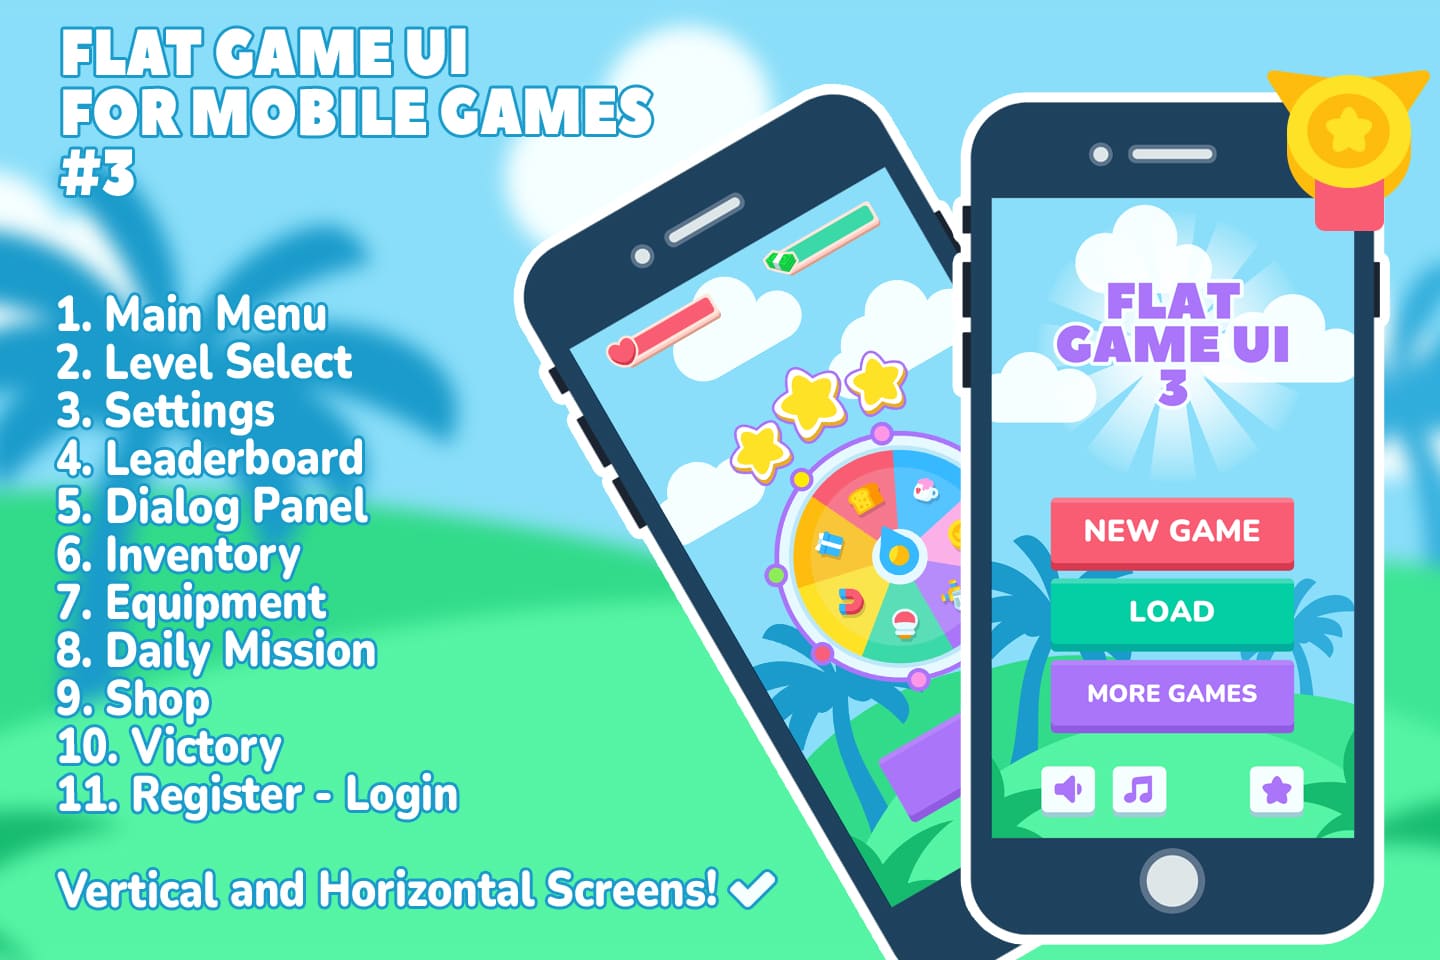 Leaderboard mobile game user interface gui assets Vector Image